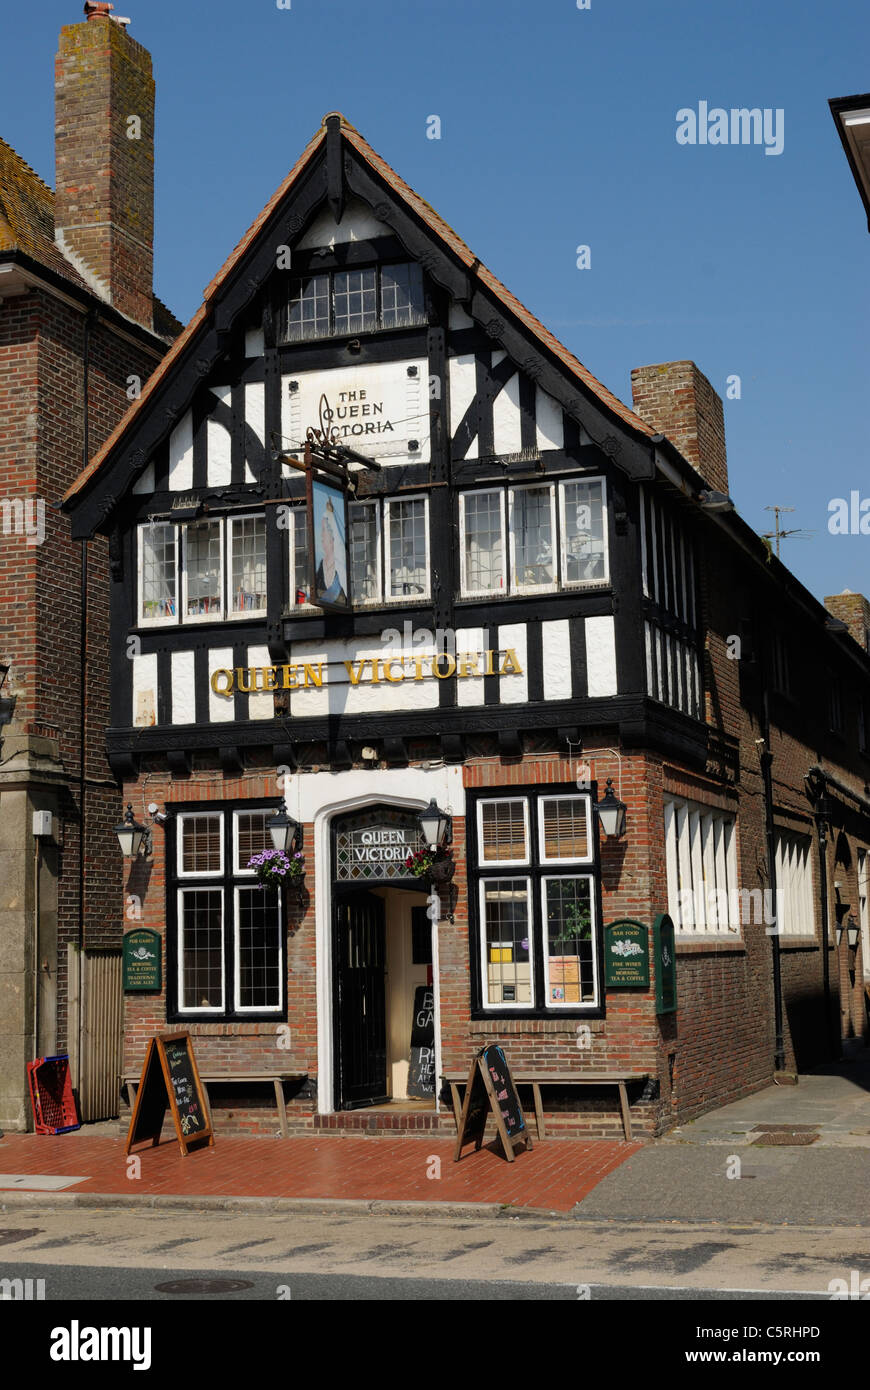 The Queen Victoria public house in the High Street at Rottingdean, East Sussex, England. Stock Photo